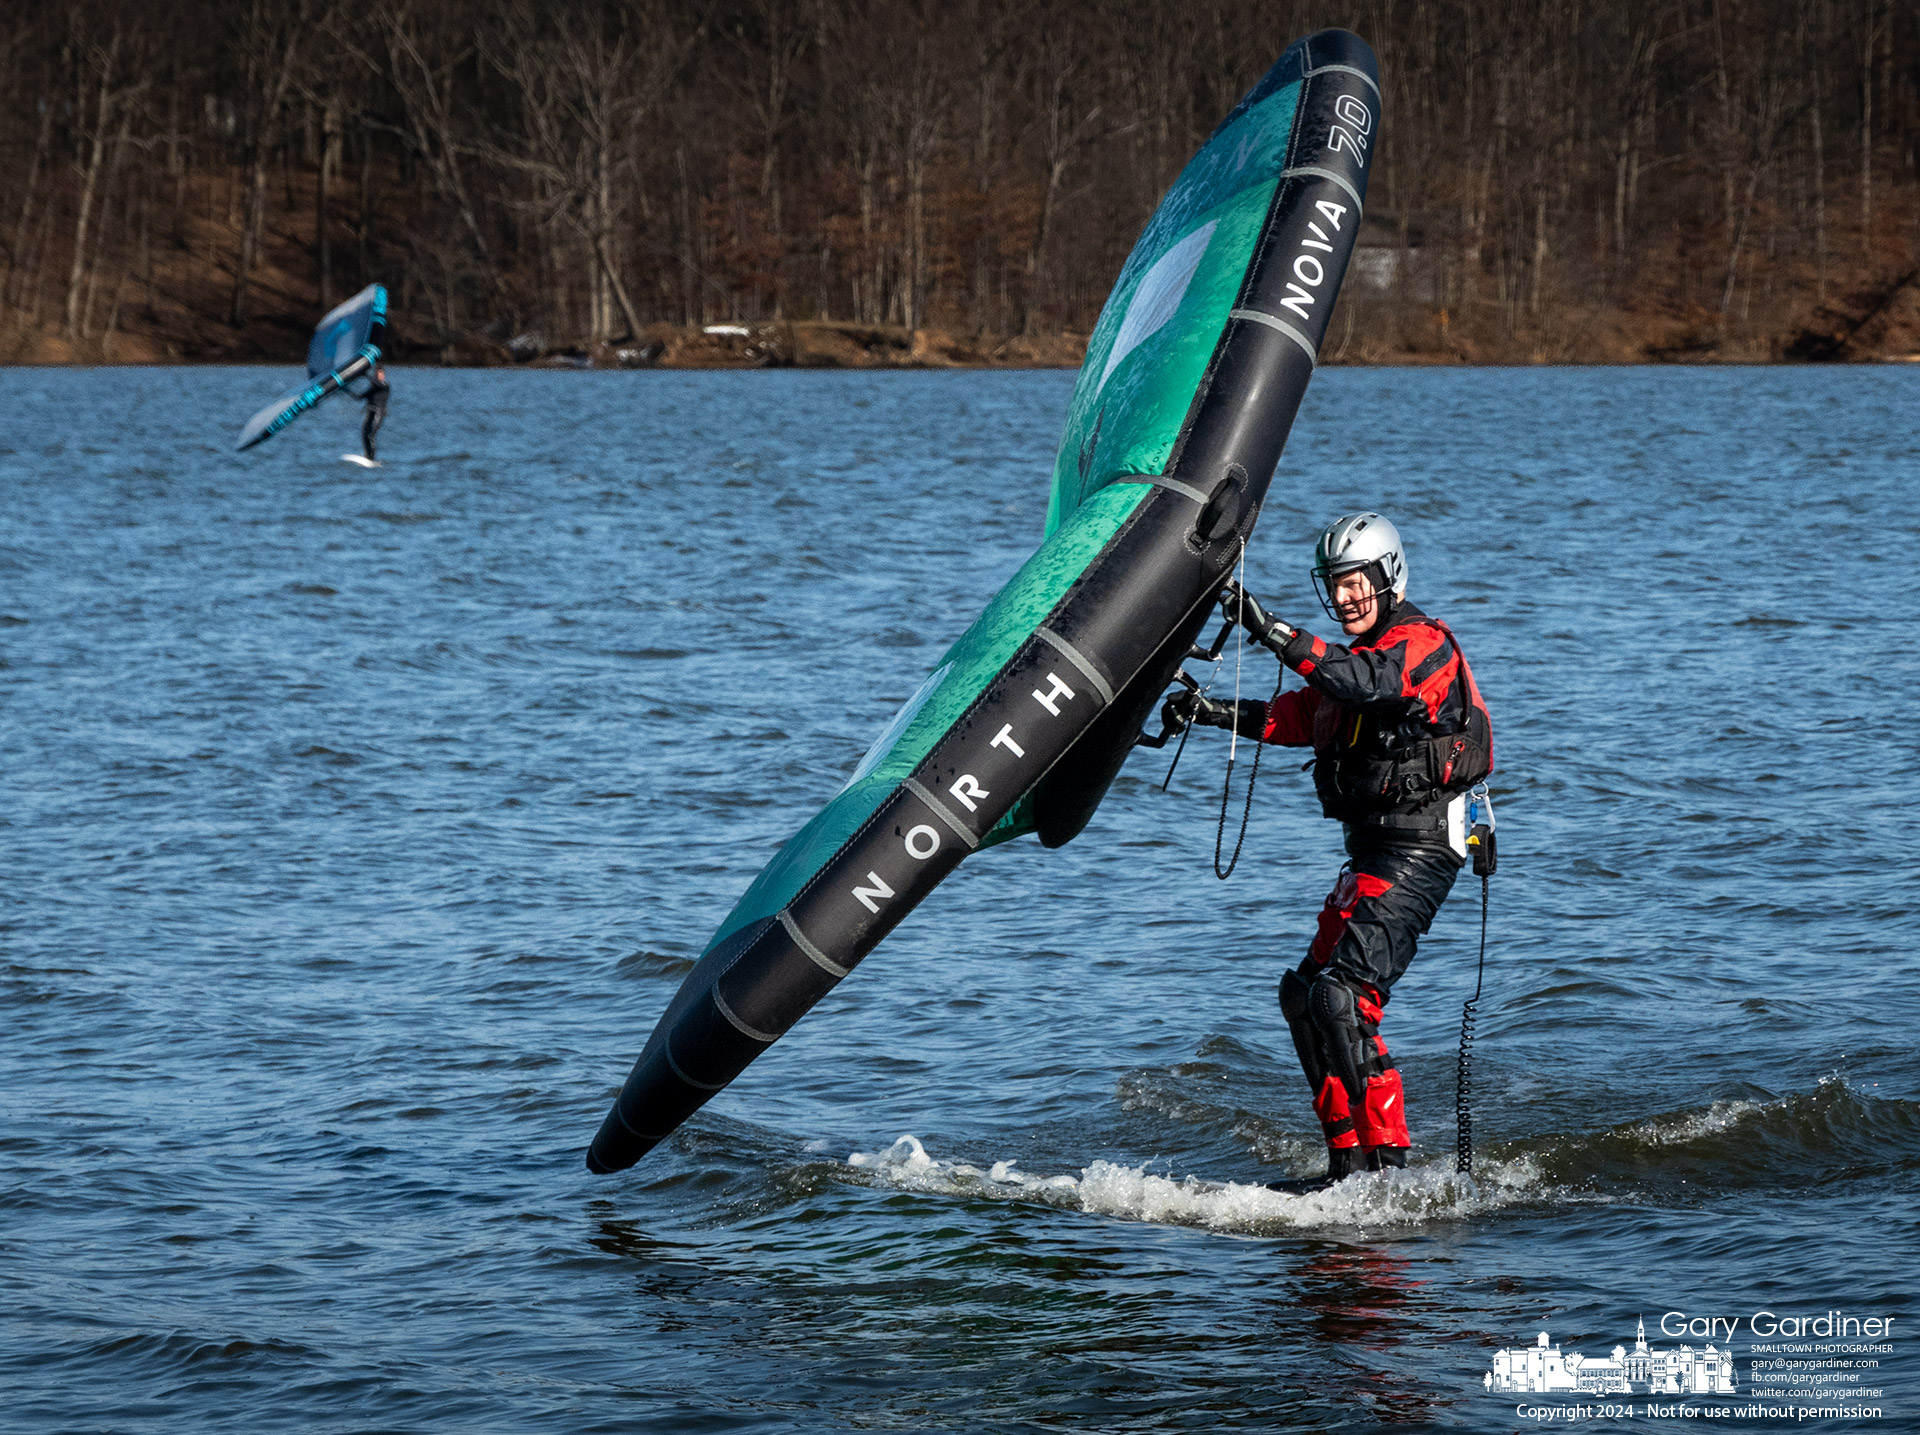 Foilboarder Jim Schneider works to lift his board onto its foil running into nearly 30 miles per hour wind gusts across Hoover Reservoir Sunday afternoon with other boarders. My Final Photo for February 25, 2024.